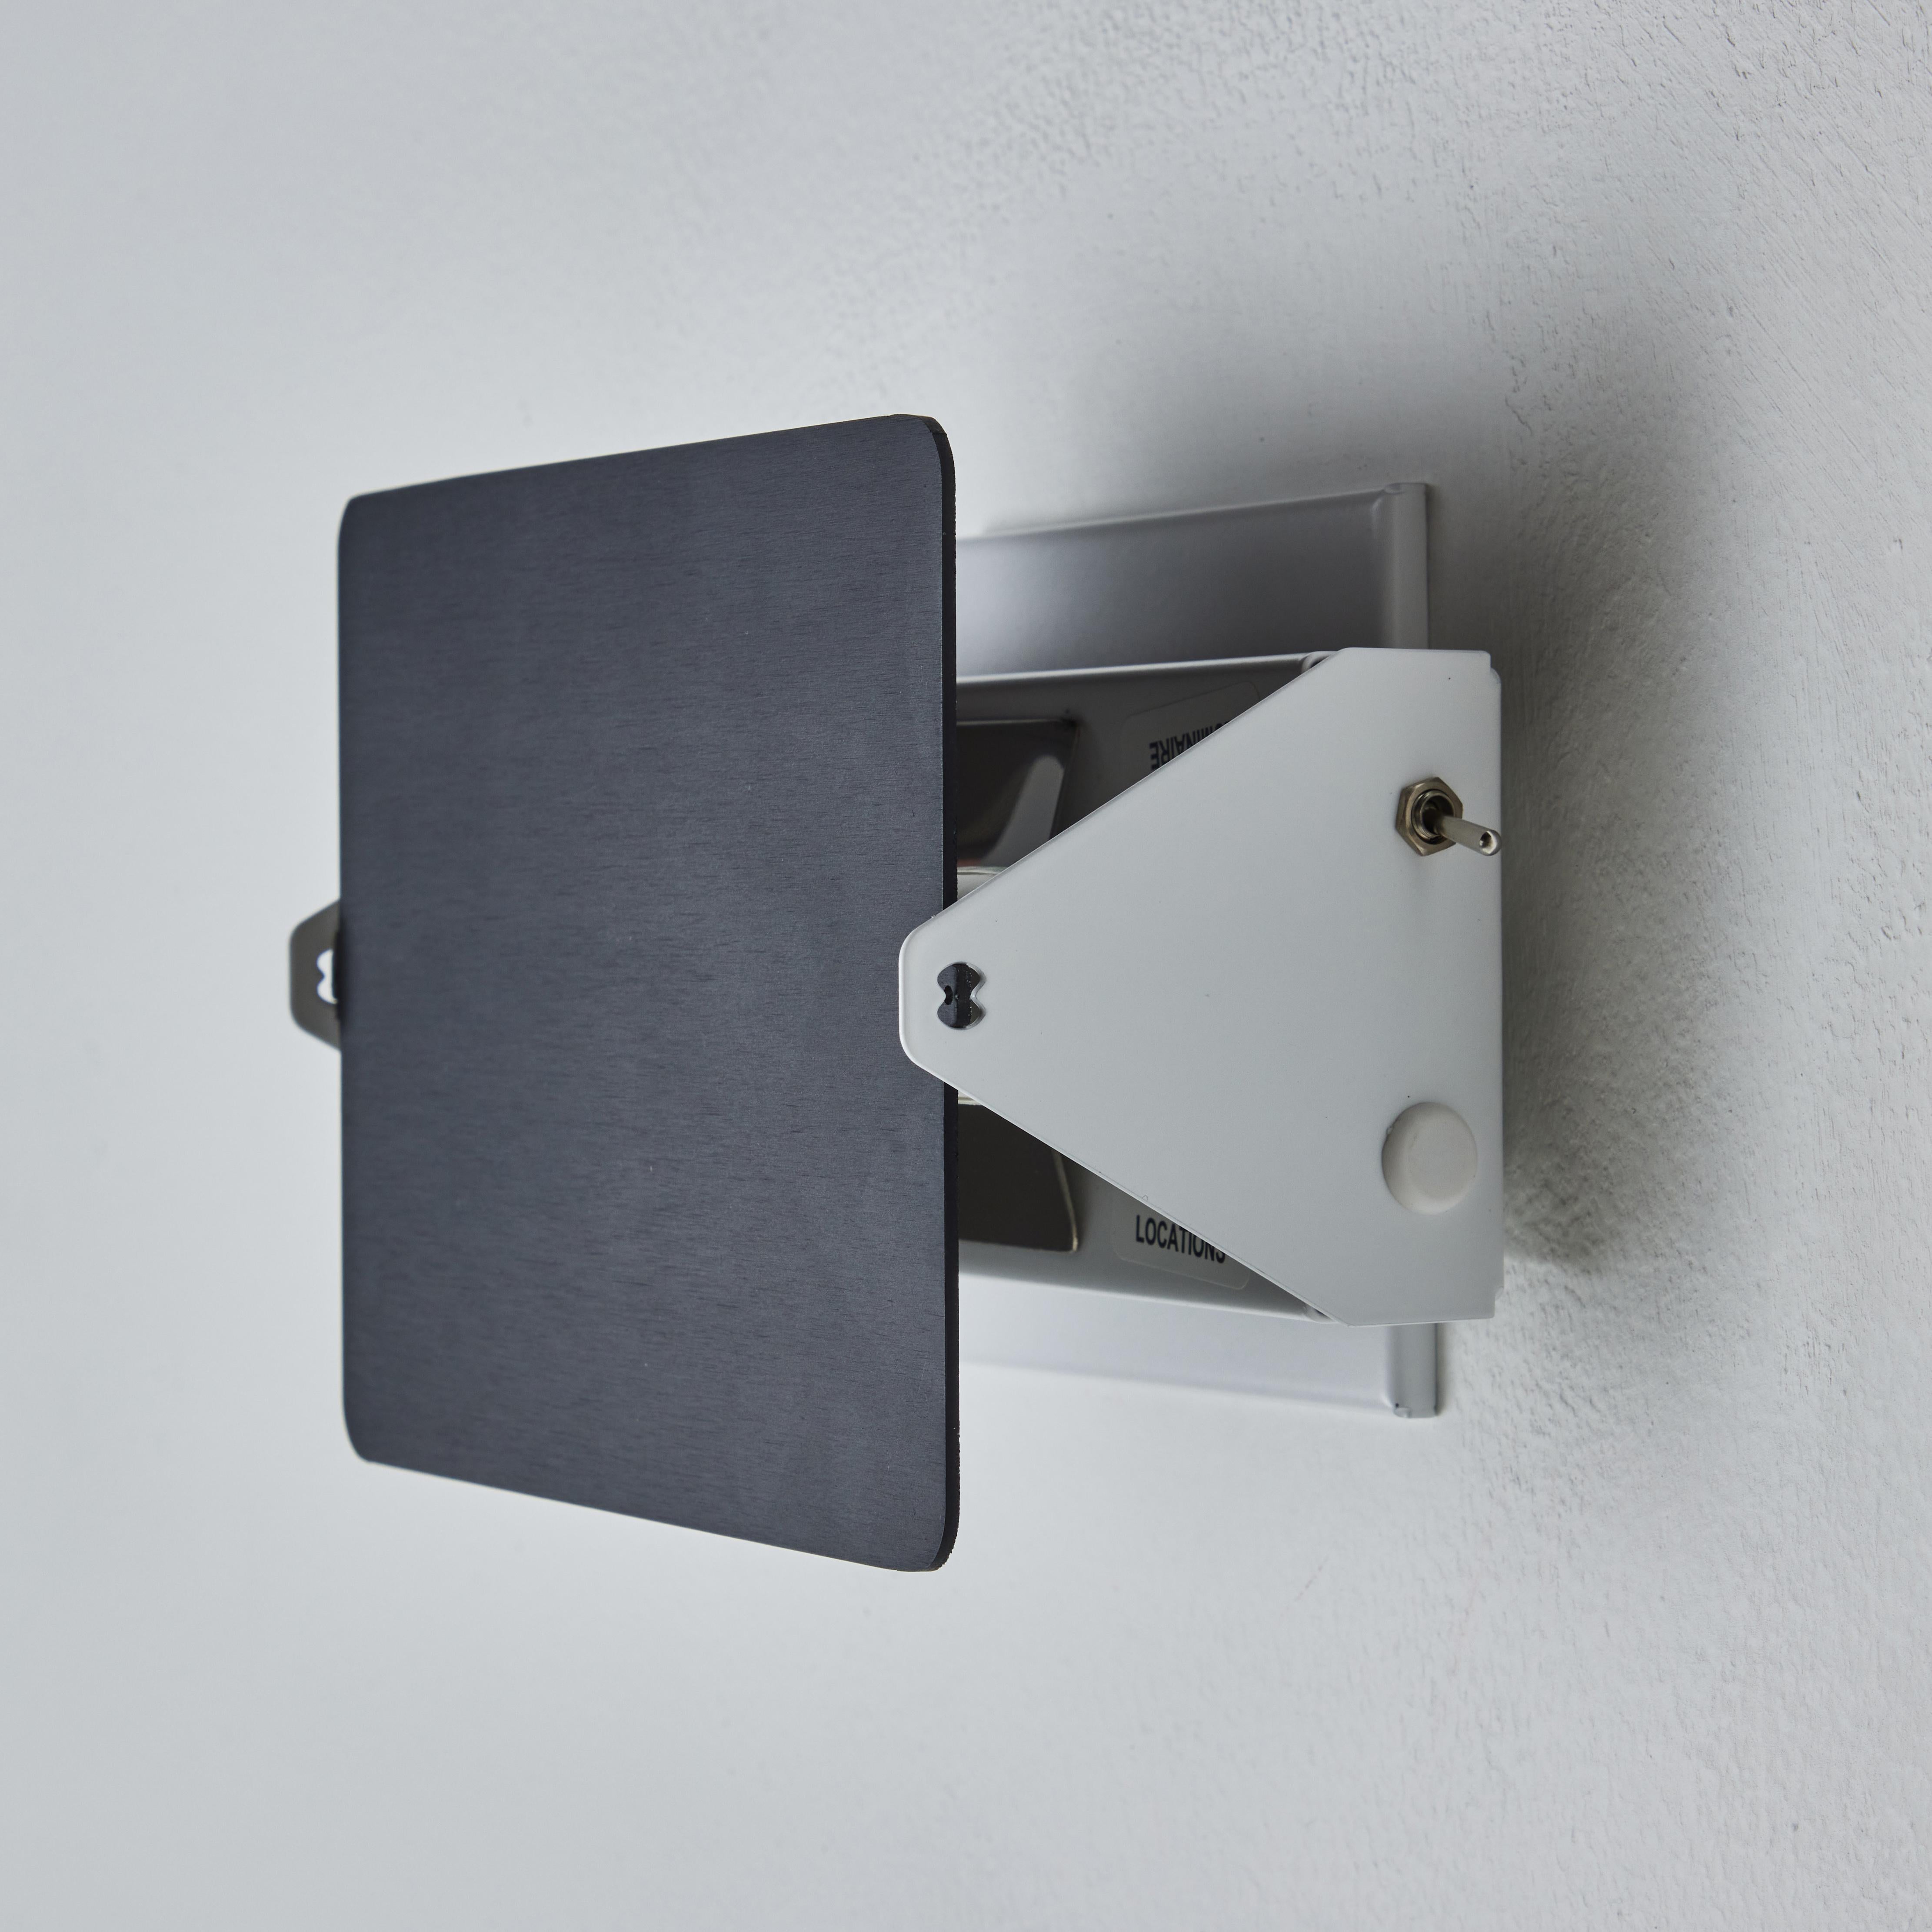 Charlotte Perriand 'Applique À Volet Pivotant' Wall Light in Black for Nemo For Sale 3